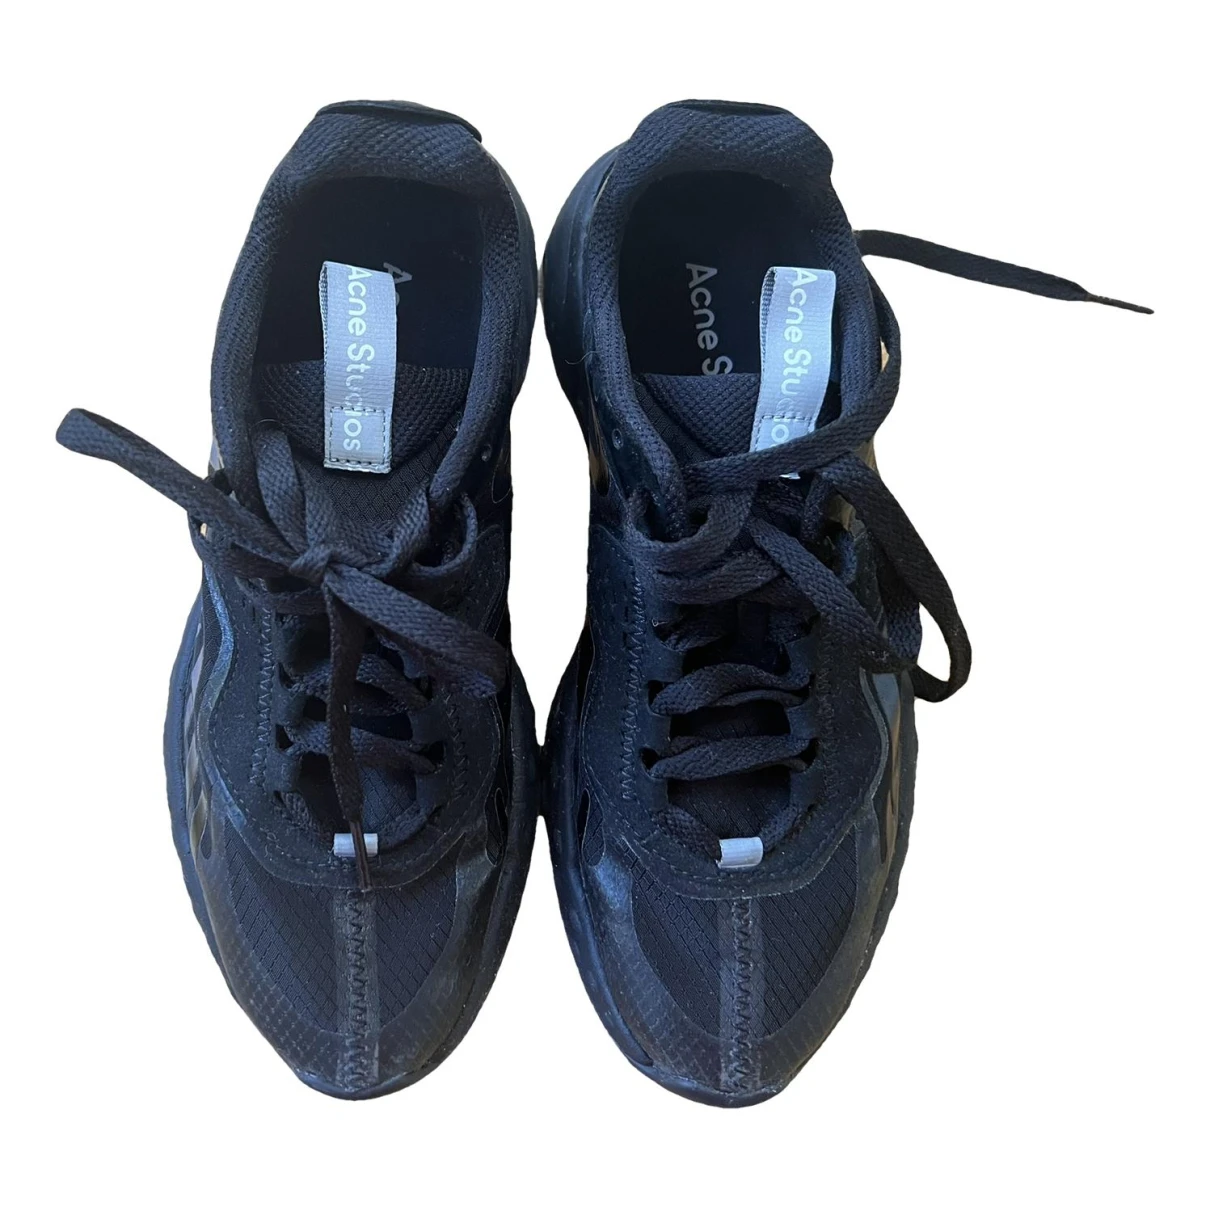 Pre-owned Acne Studios Cloth Trainers In Black